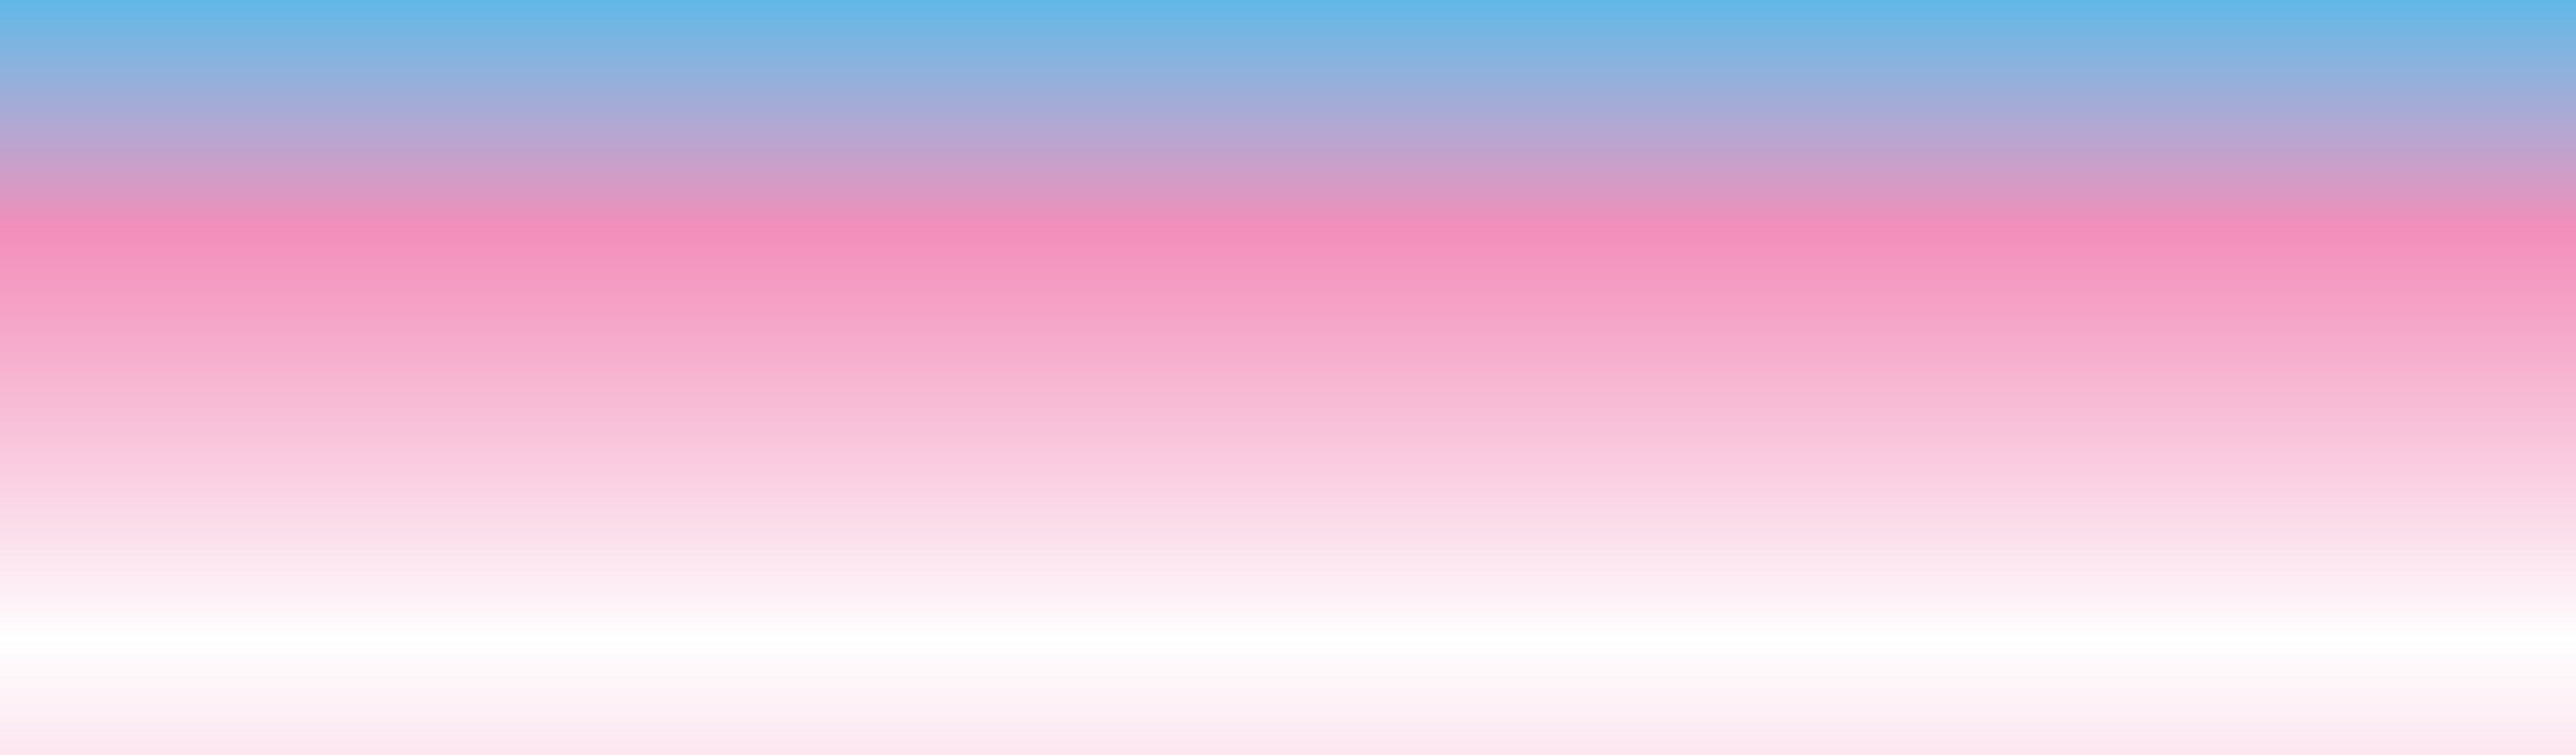 Abstract pink, blue and white background